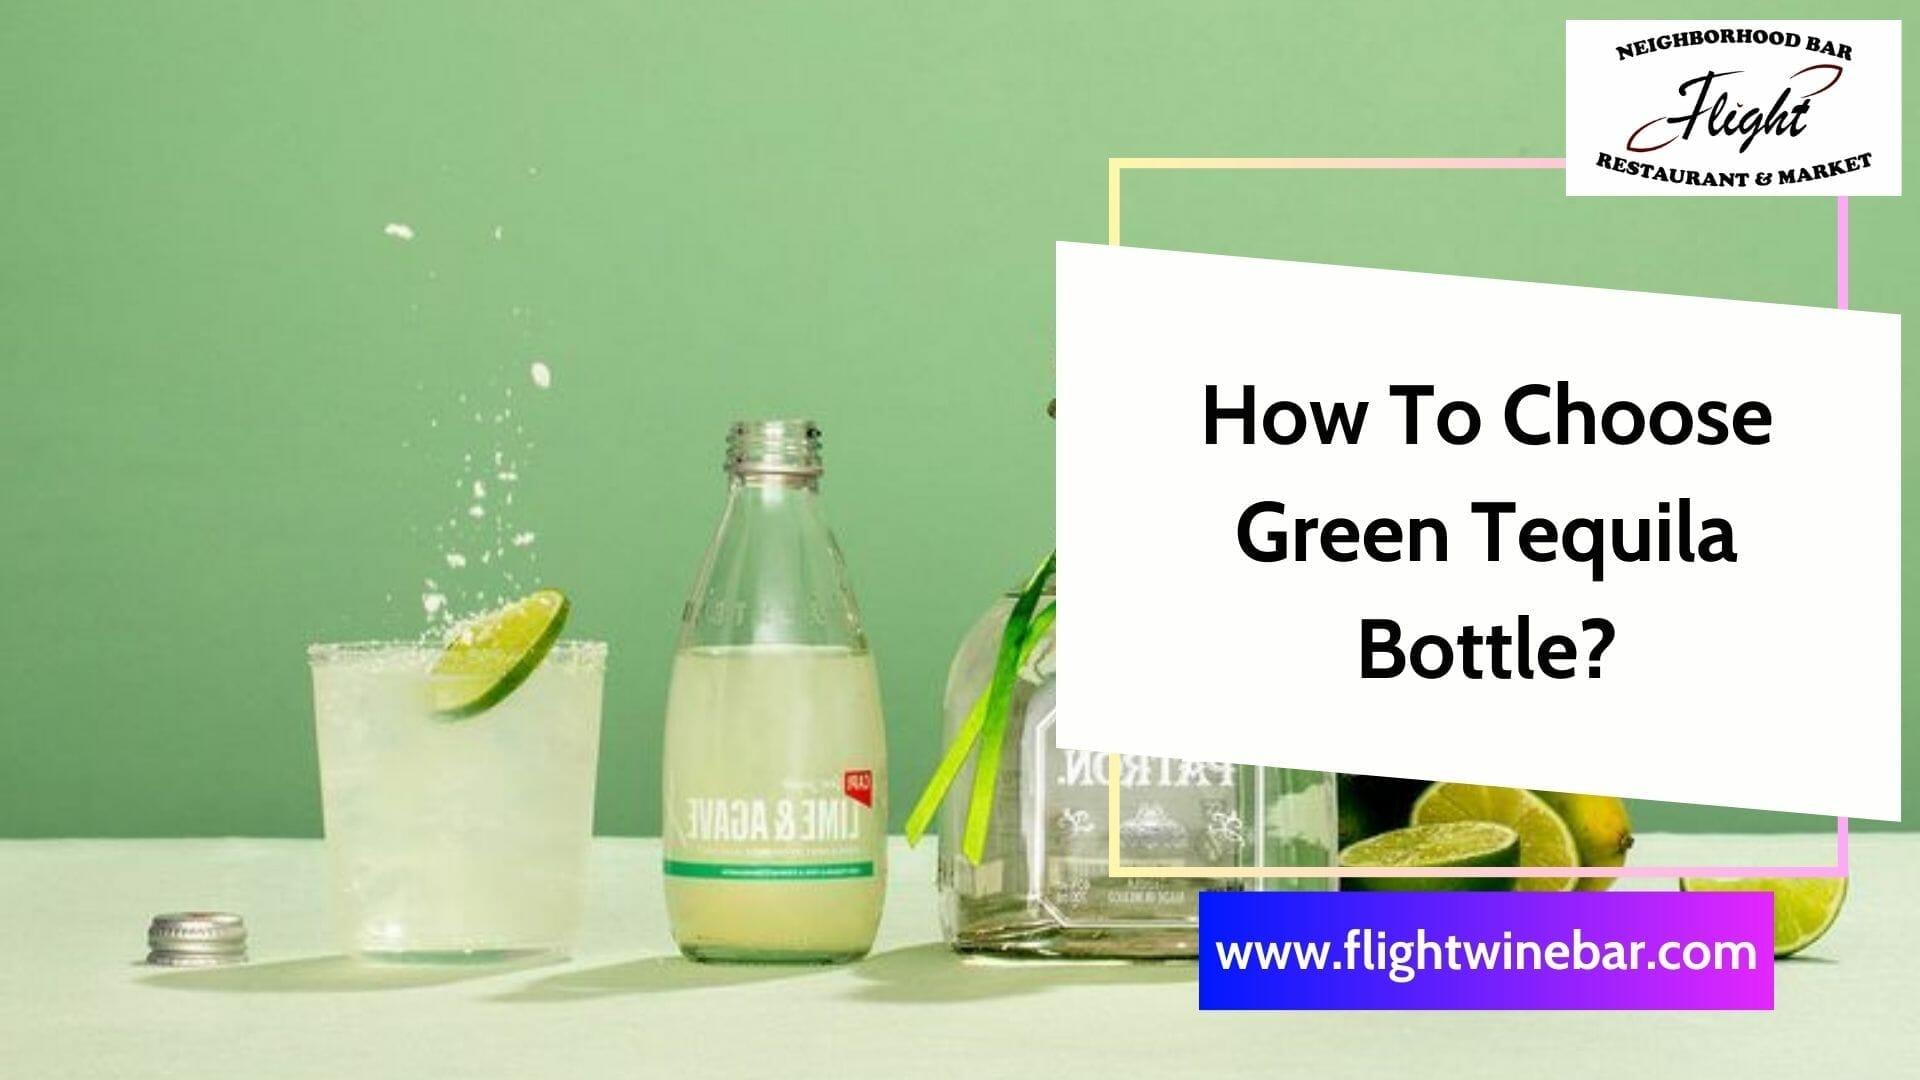 How To Choose Green Tequila Bottle